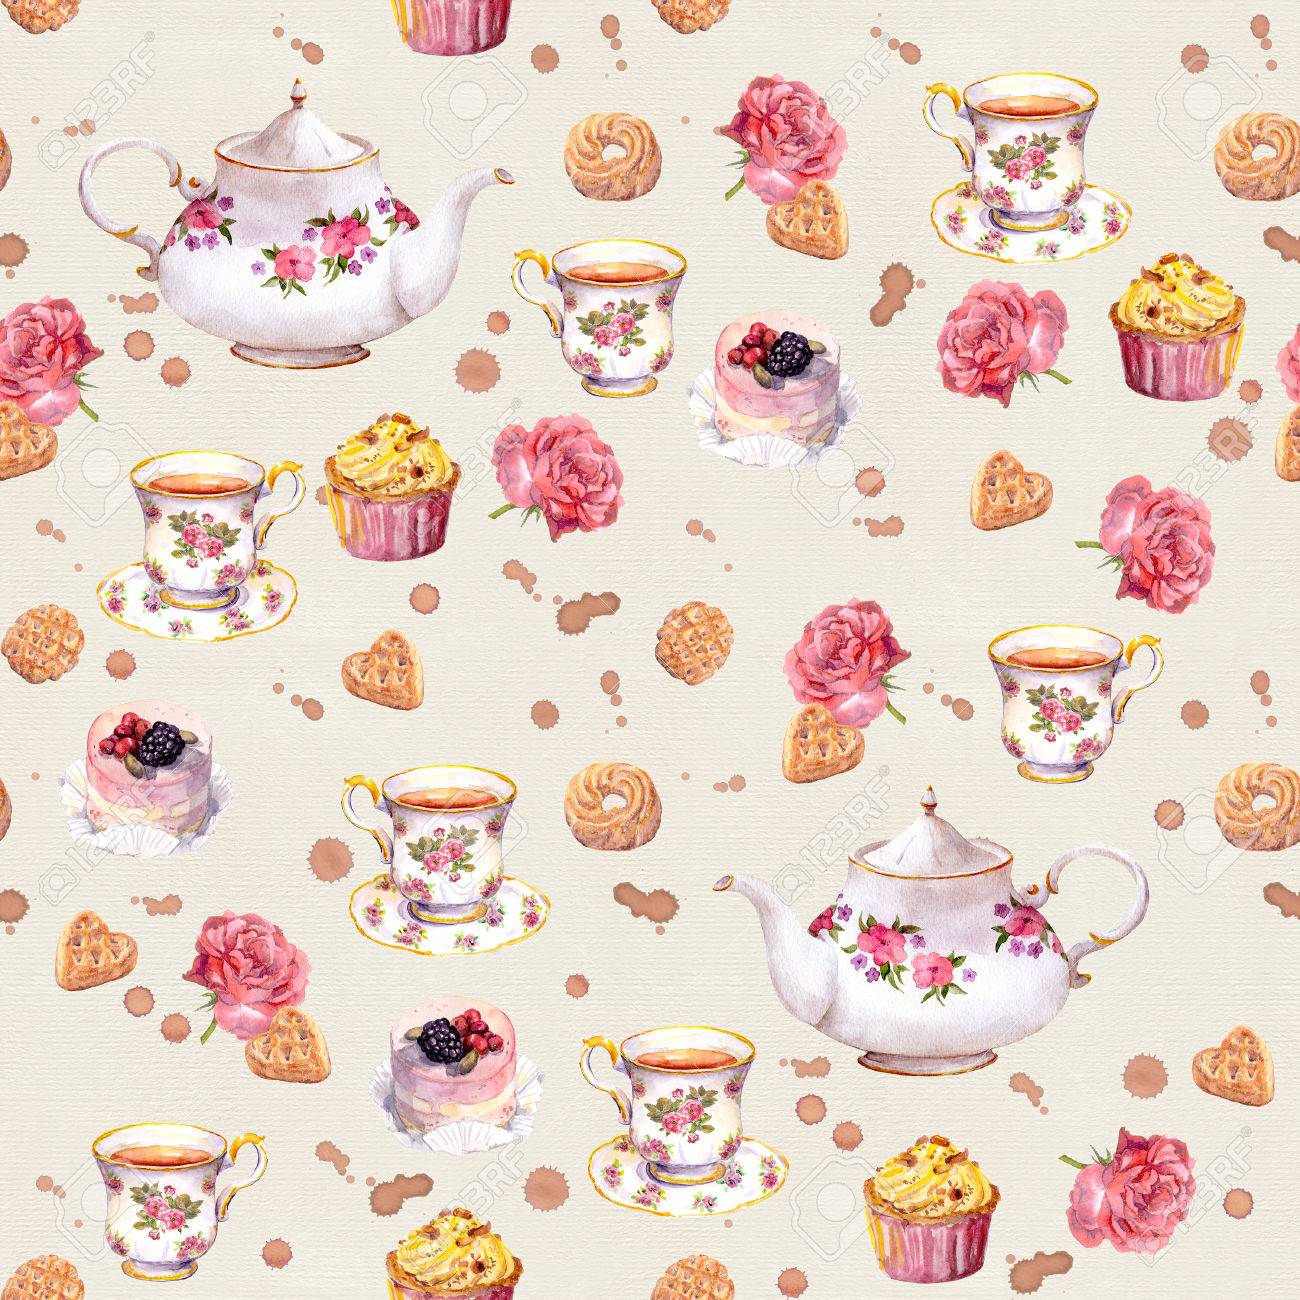 Tea Pot Teacup Cakes And Flowers Repeated Time Wallpaper